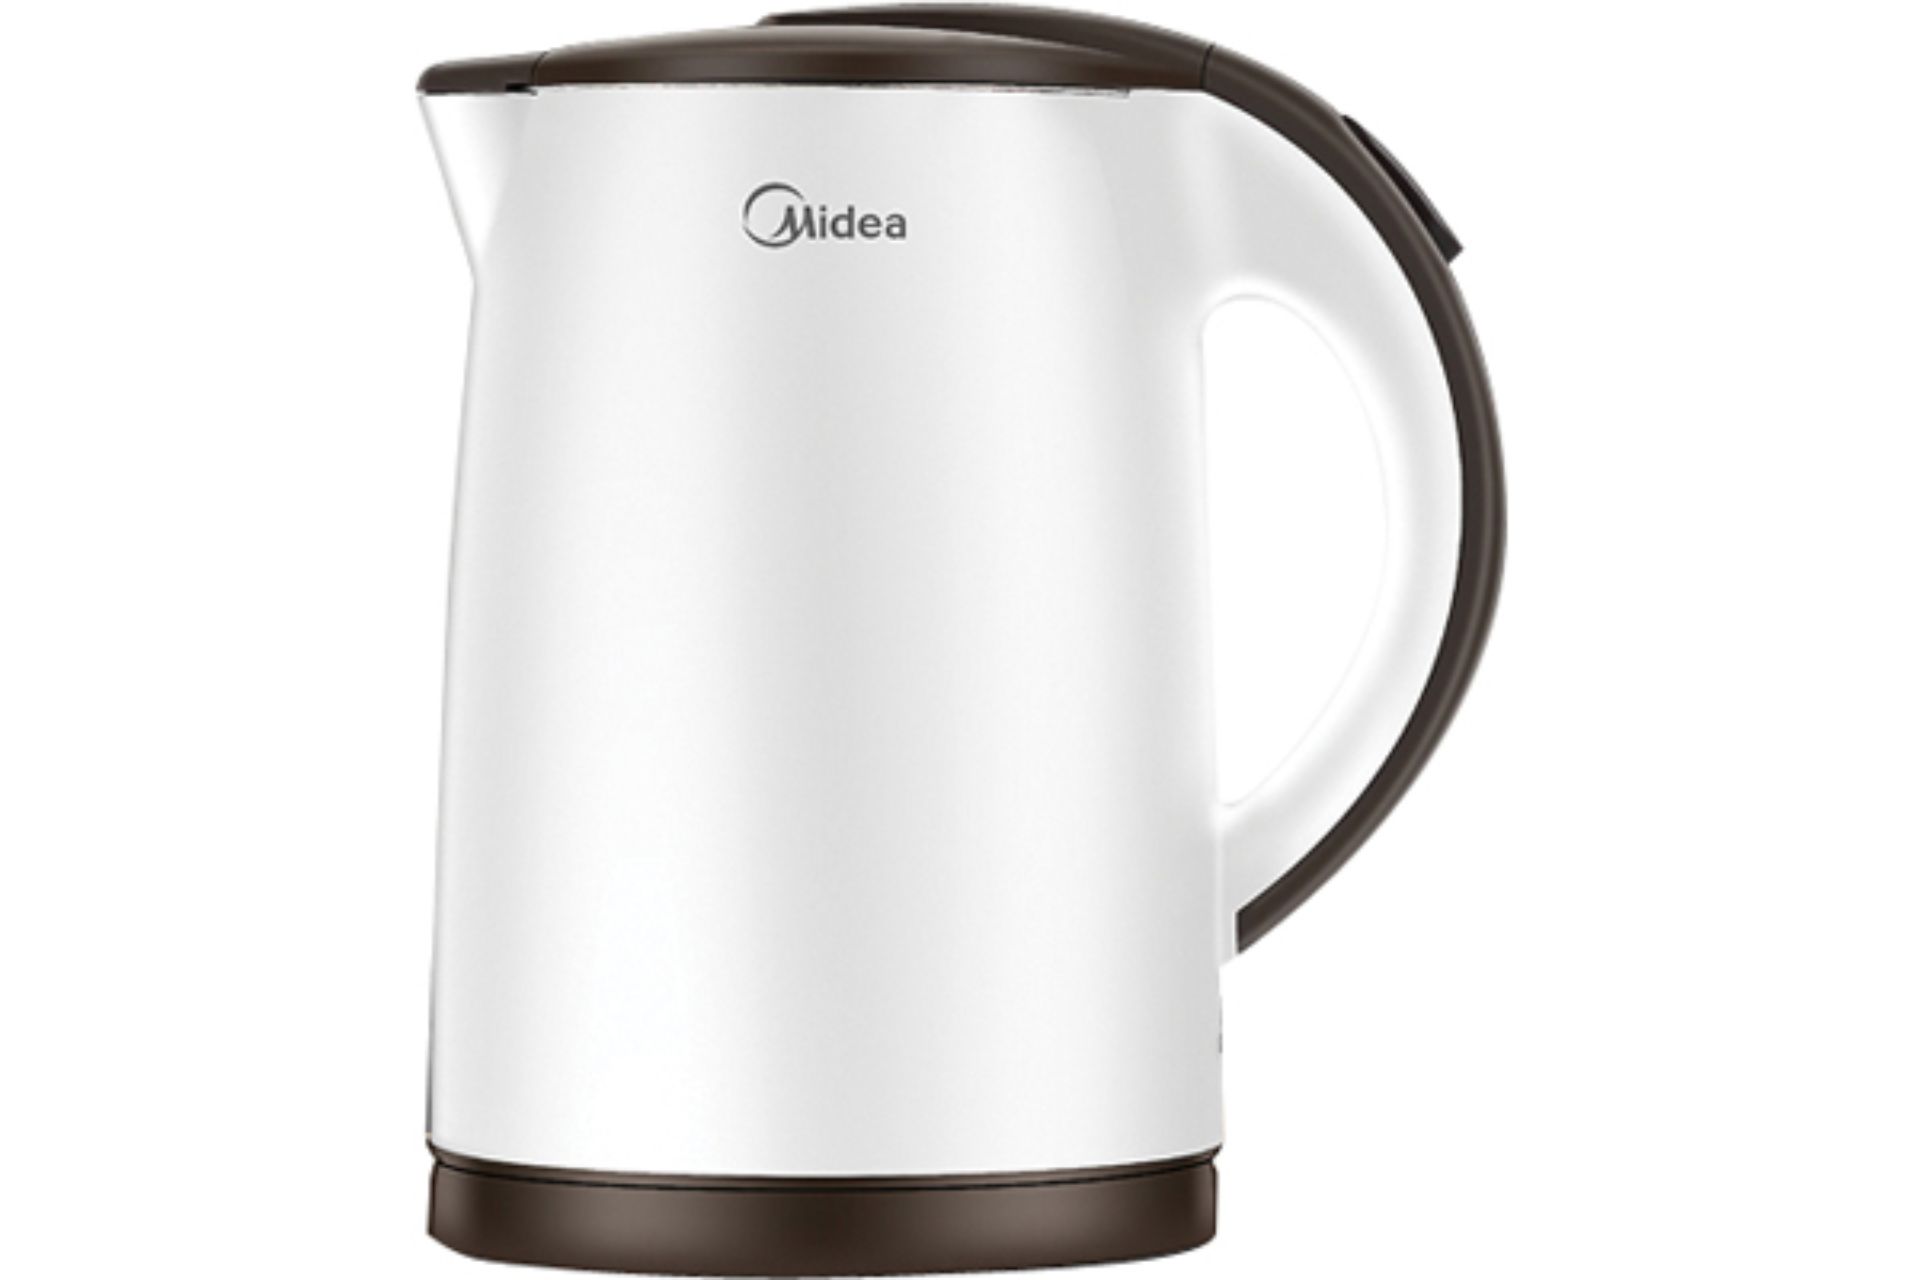 https://www.midea.com/content/dam/midea-aem/my/kitchen-appliances/hot-thermo-pot/thermo-pot/jug-kettles/1-5l-cool-touch-series-jug-kettle-mk-15d/gallery1.jpg